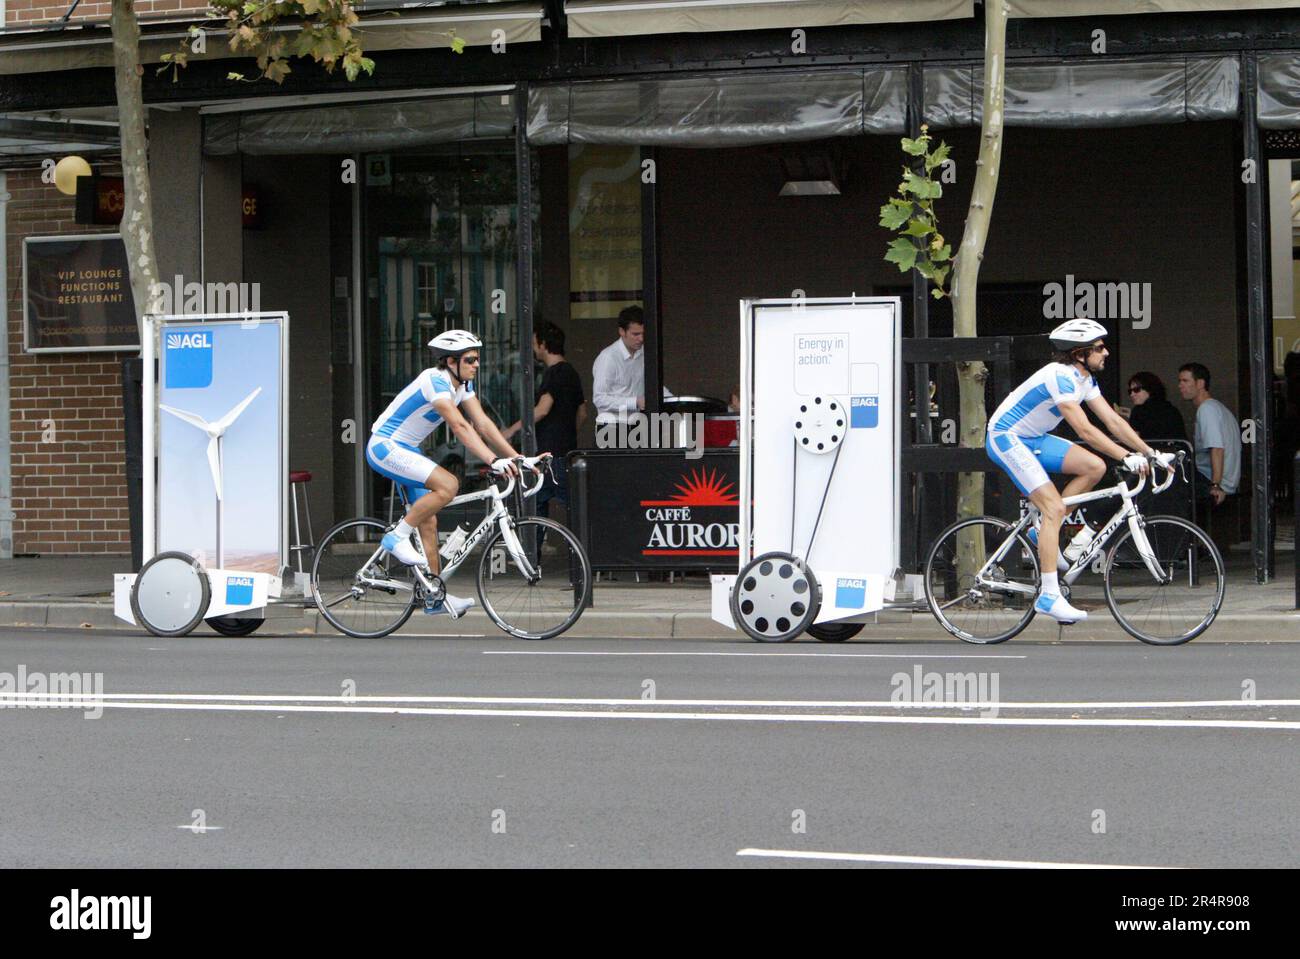 Moving advertising displayed on bicycles in Woolloomooloo in Sydney, Australia. Stock Photo